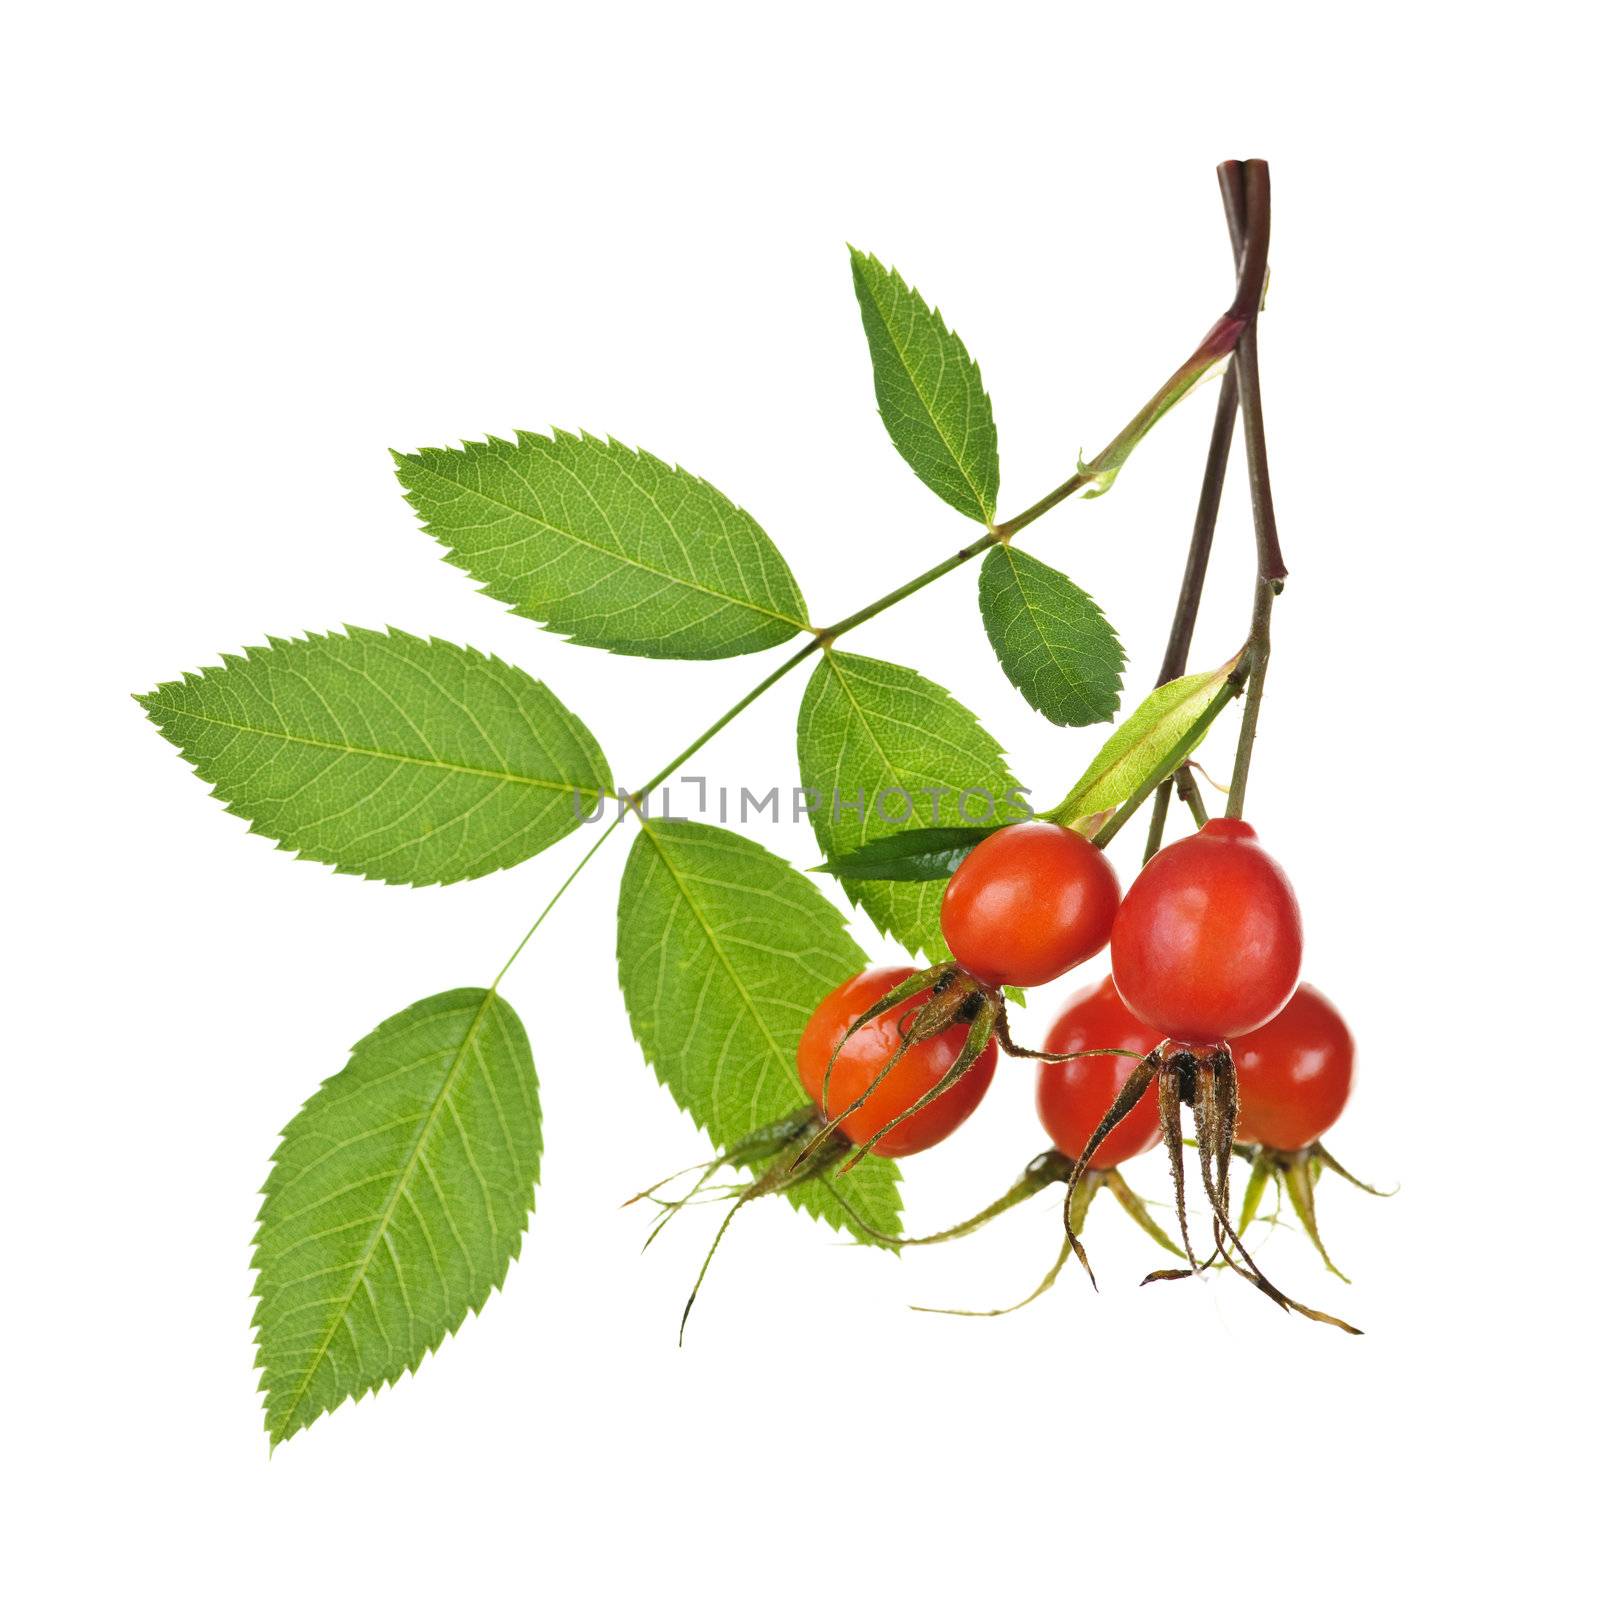 Rose branch with rosehips isolated on white background